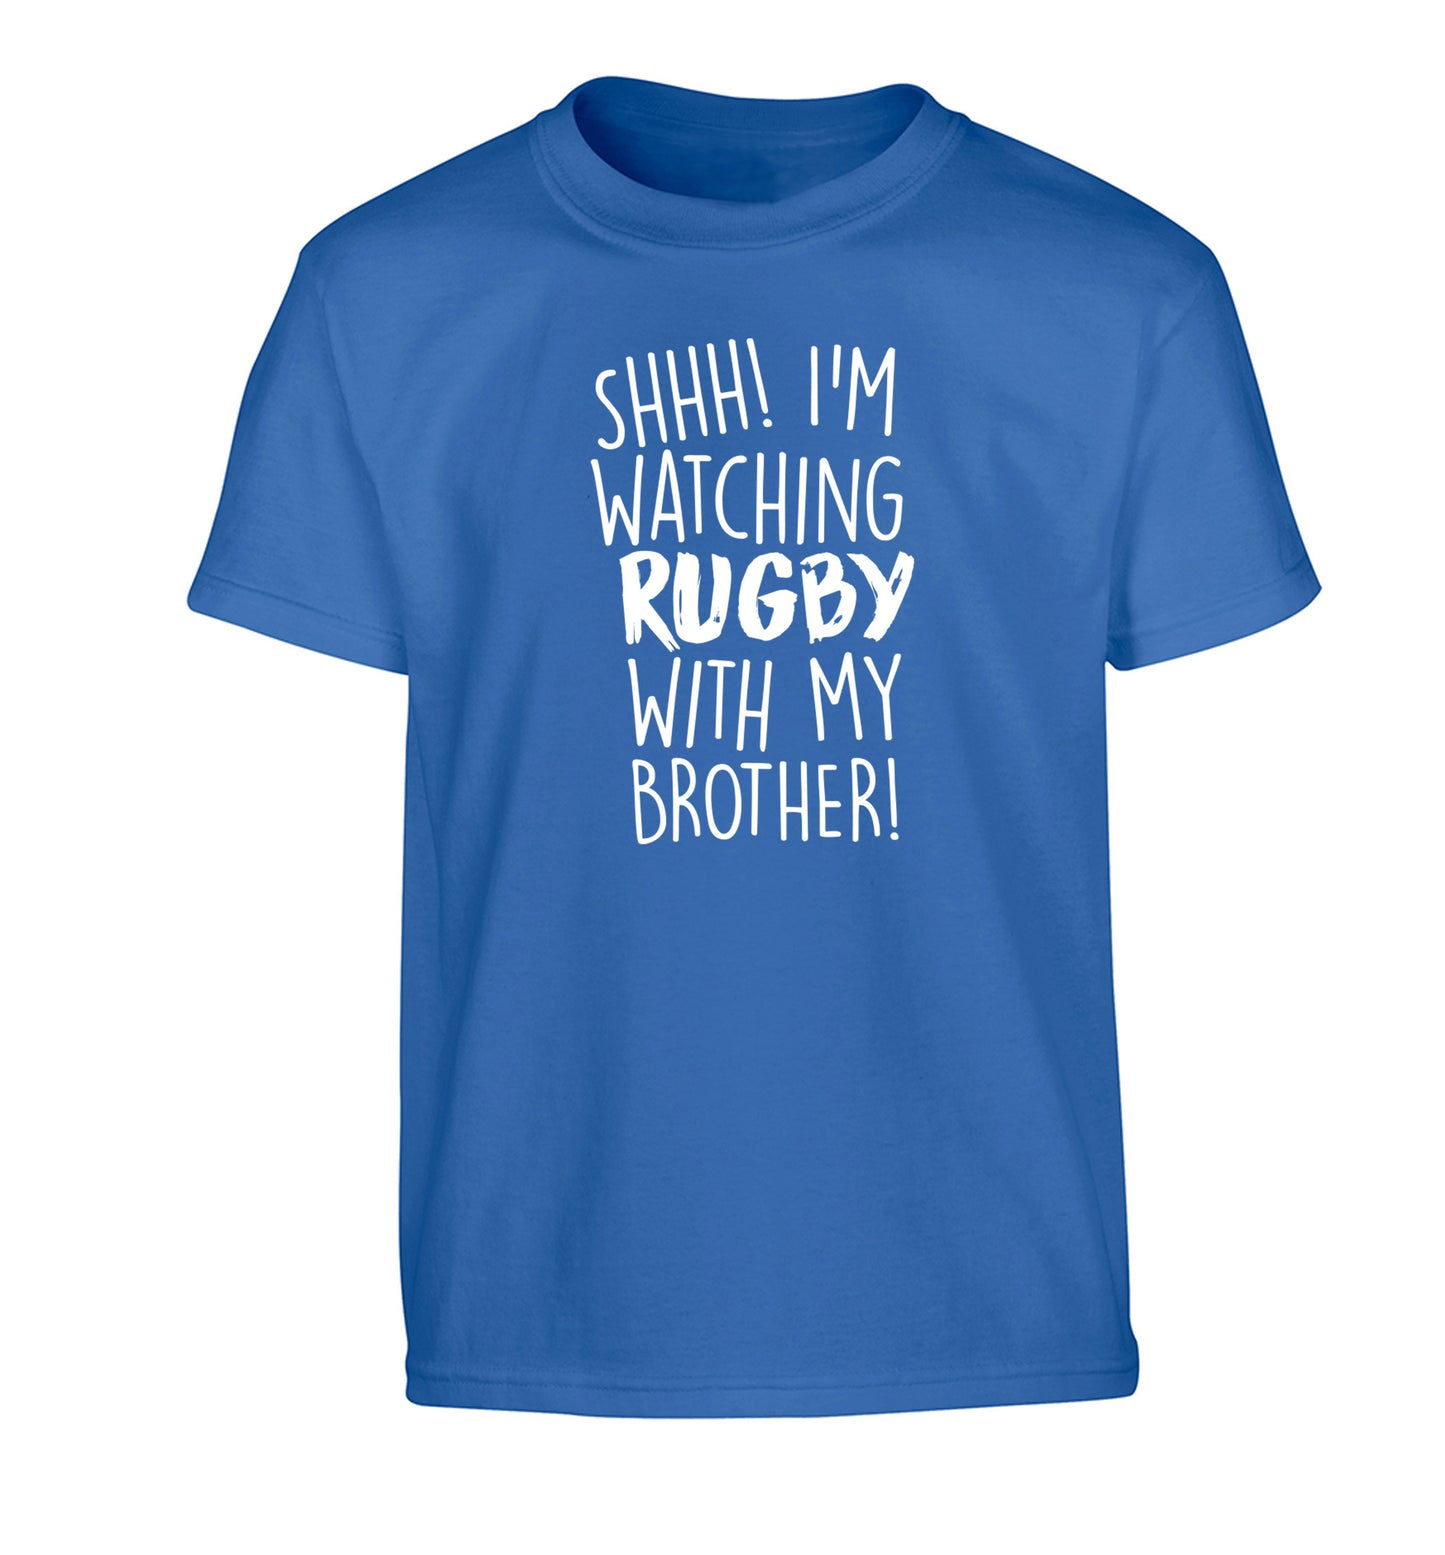 Shh... I'm watching rugby with my brother Children's blue Tshirt 12-13 Years